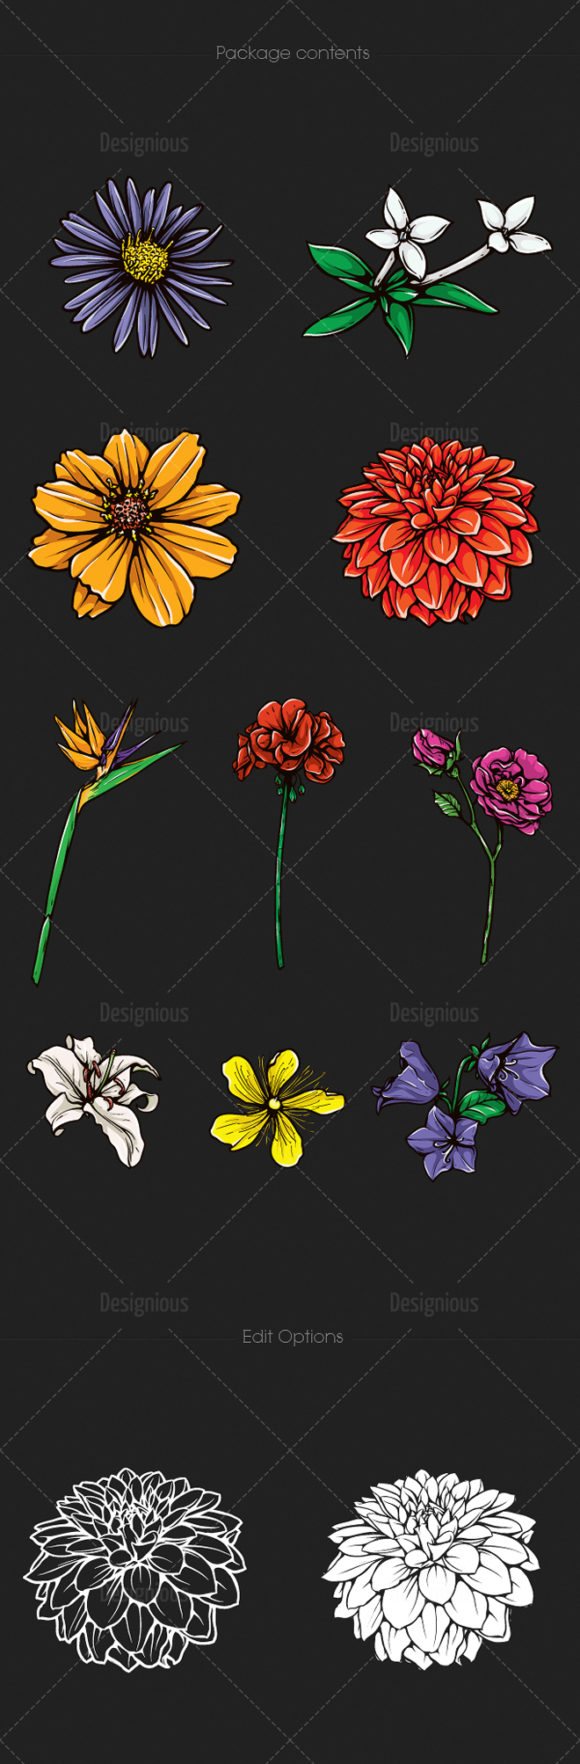 Floral Vector Pack 109 2